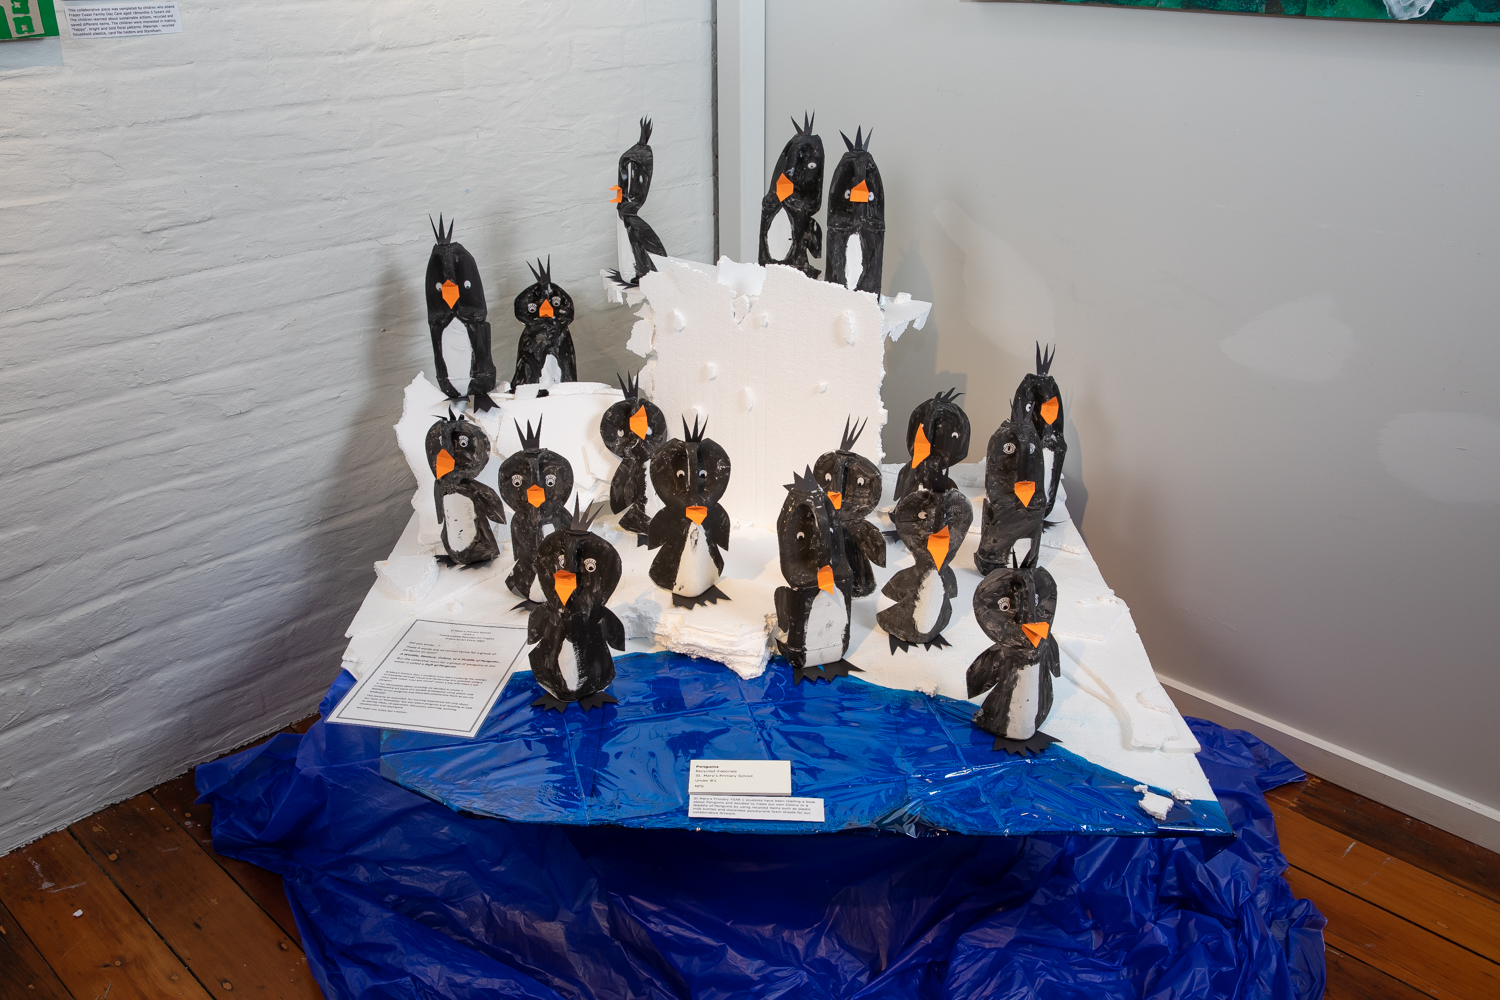 Under 8 - 2nd prize - St Marys Primary School - A Waddle of Penguins